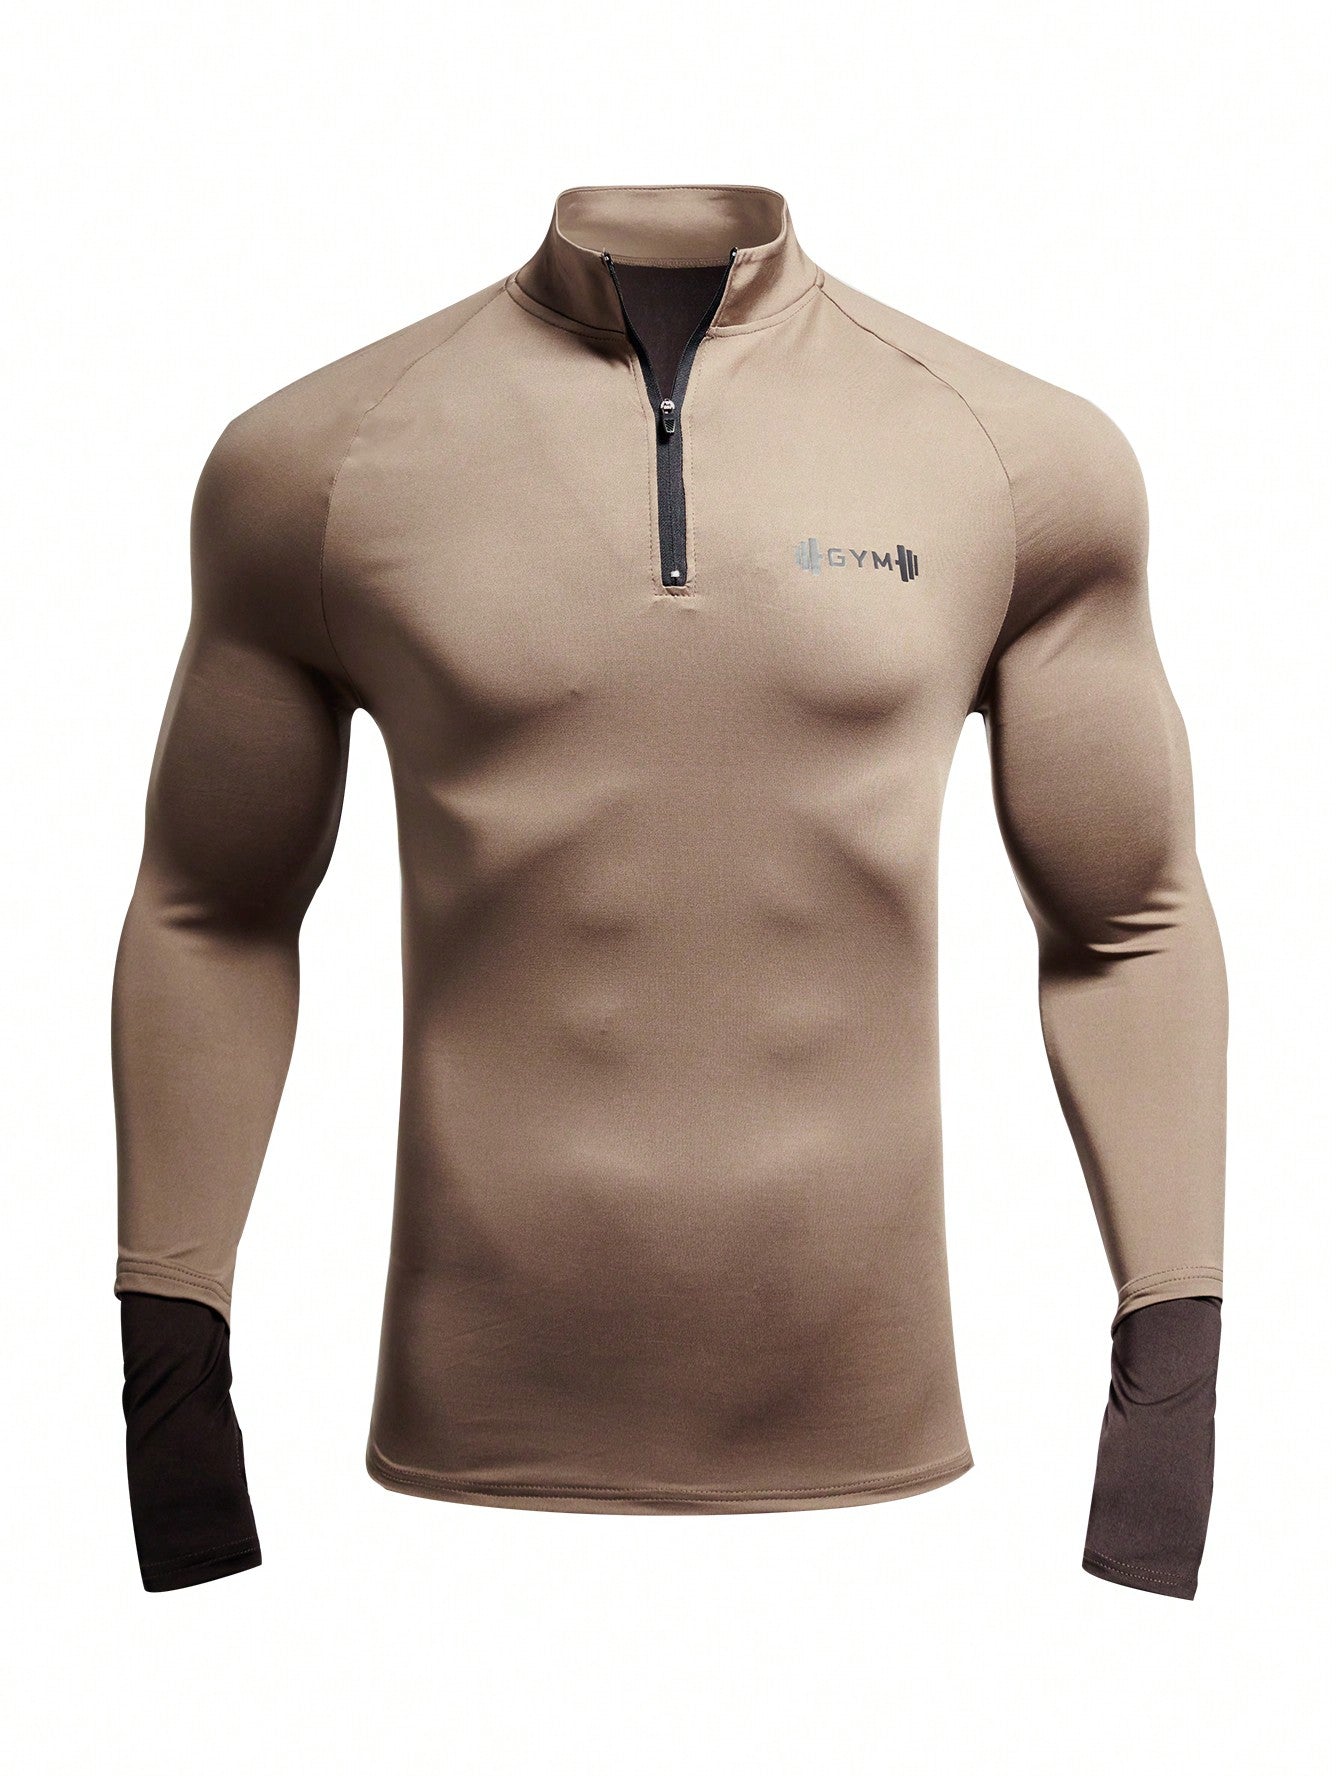 Men's Stand Collar Zip-Up Sports Jacket Workout Tops